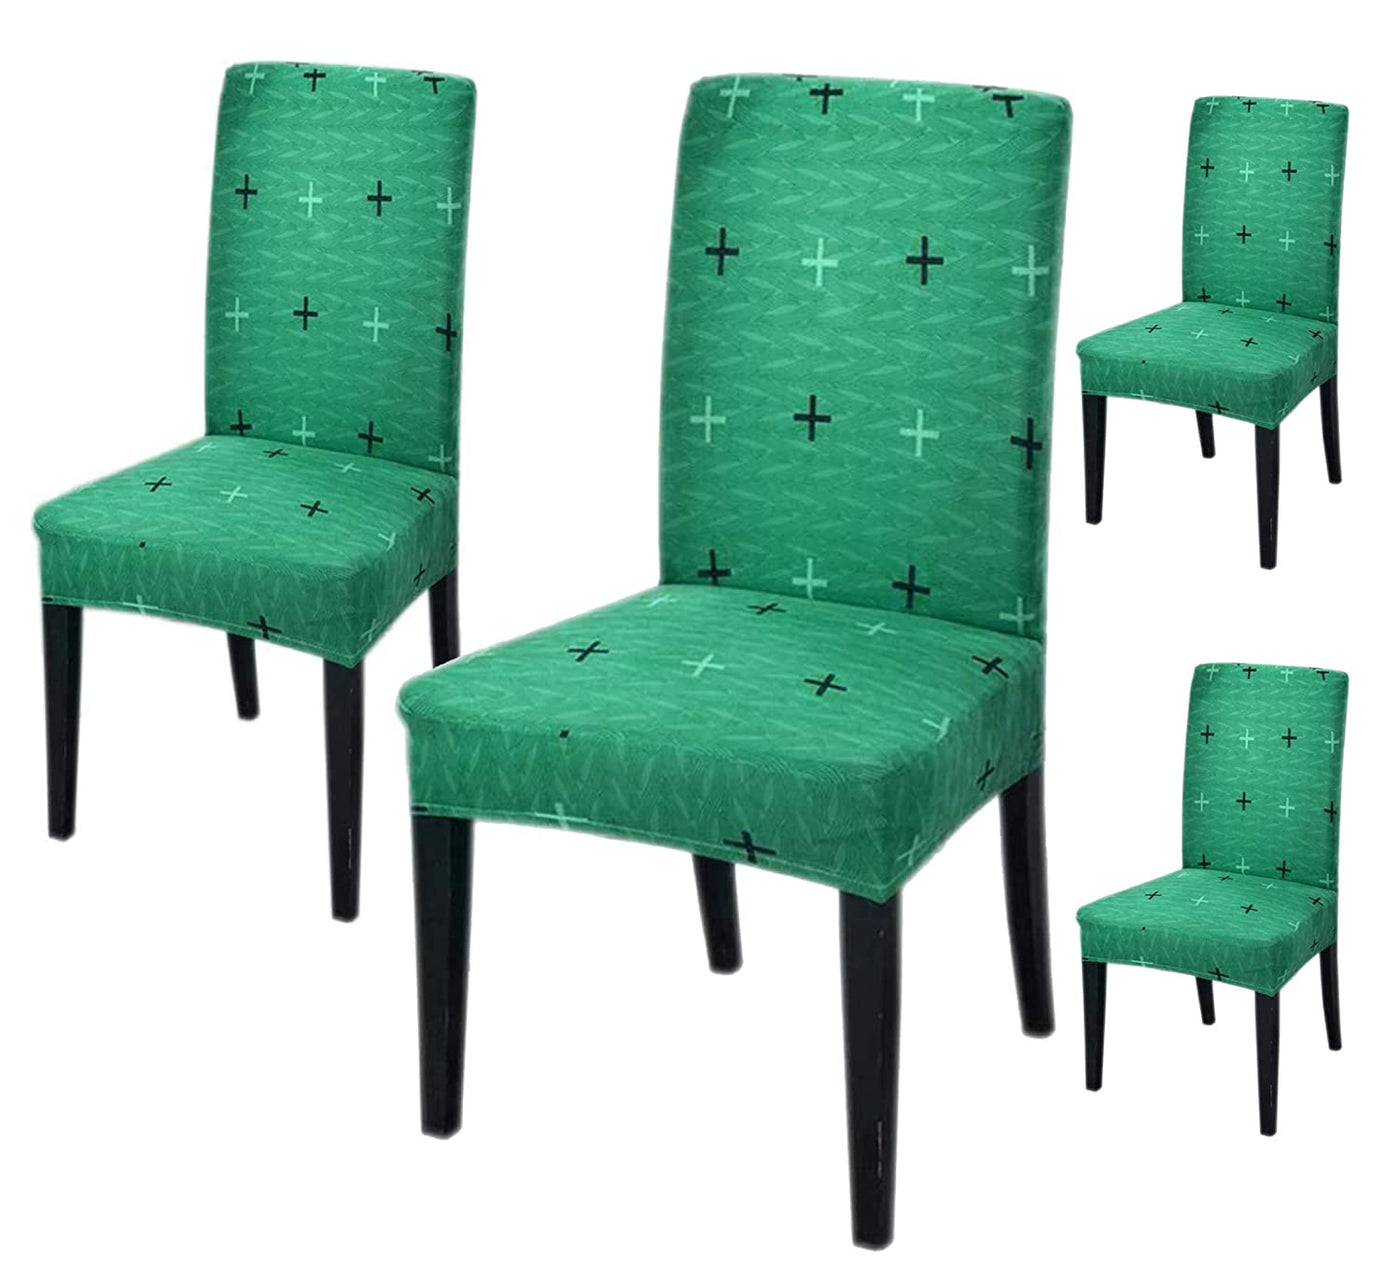 Printed Chair Cover- Green Plus